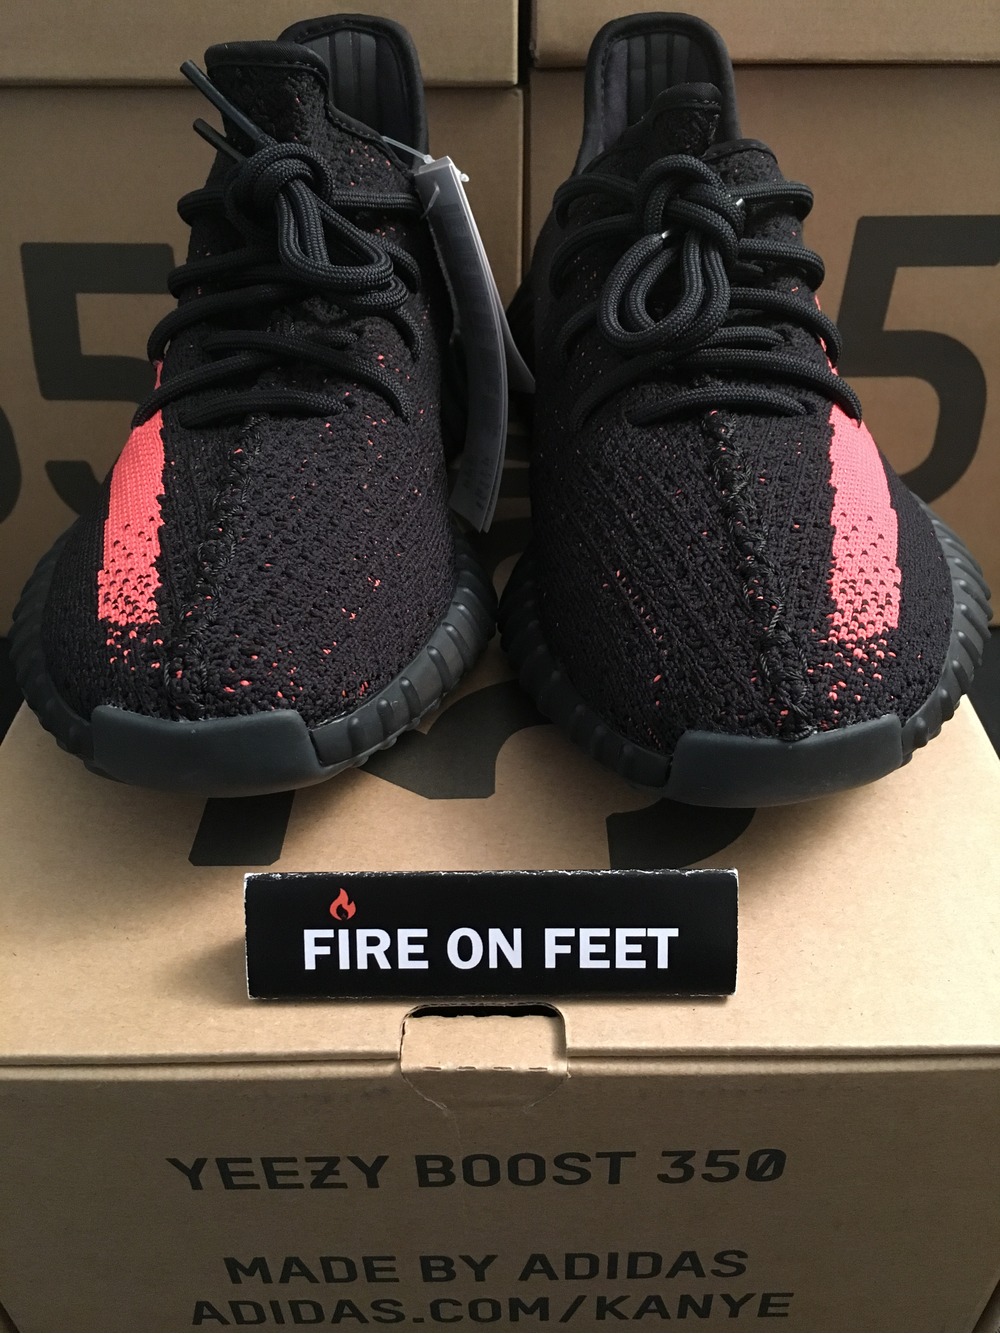 Brad Hall Buys the YEEZY Boost 350 v2 'Bred' for His Wife